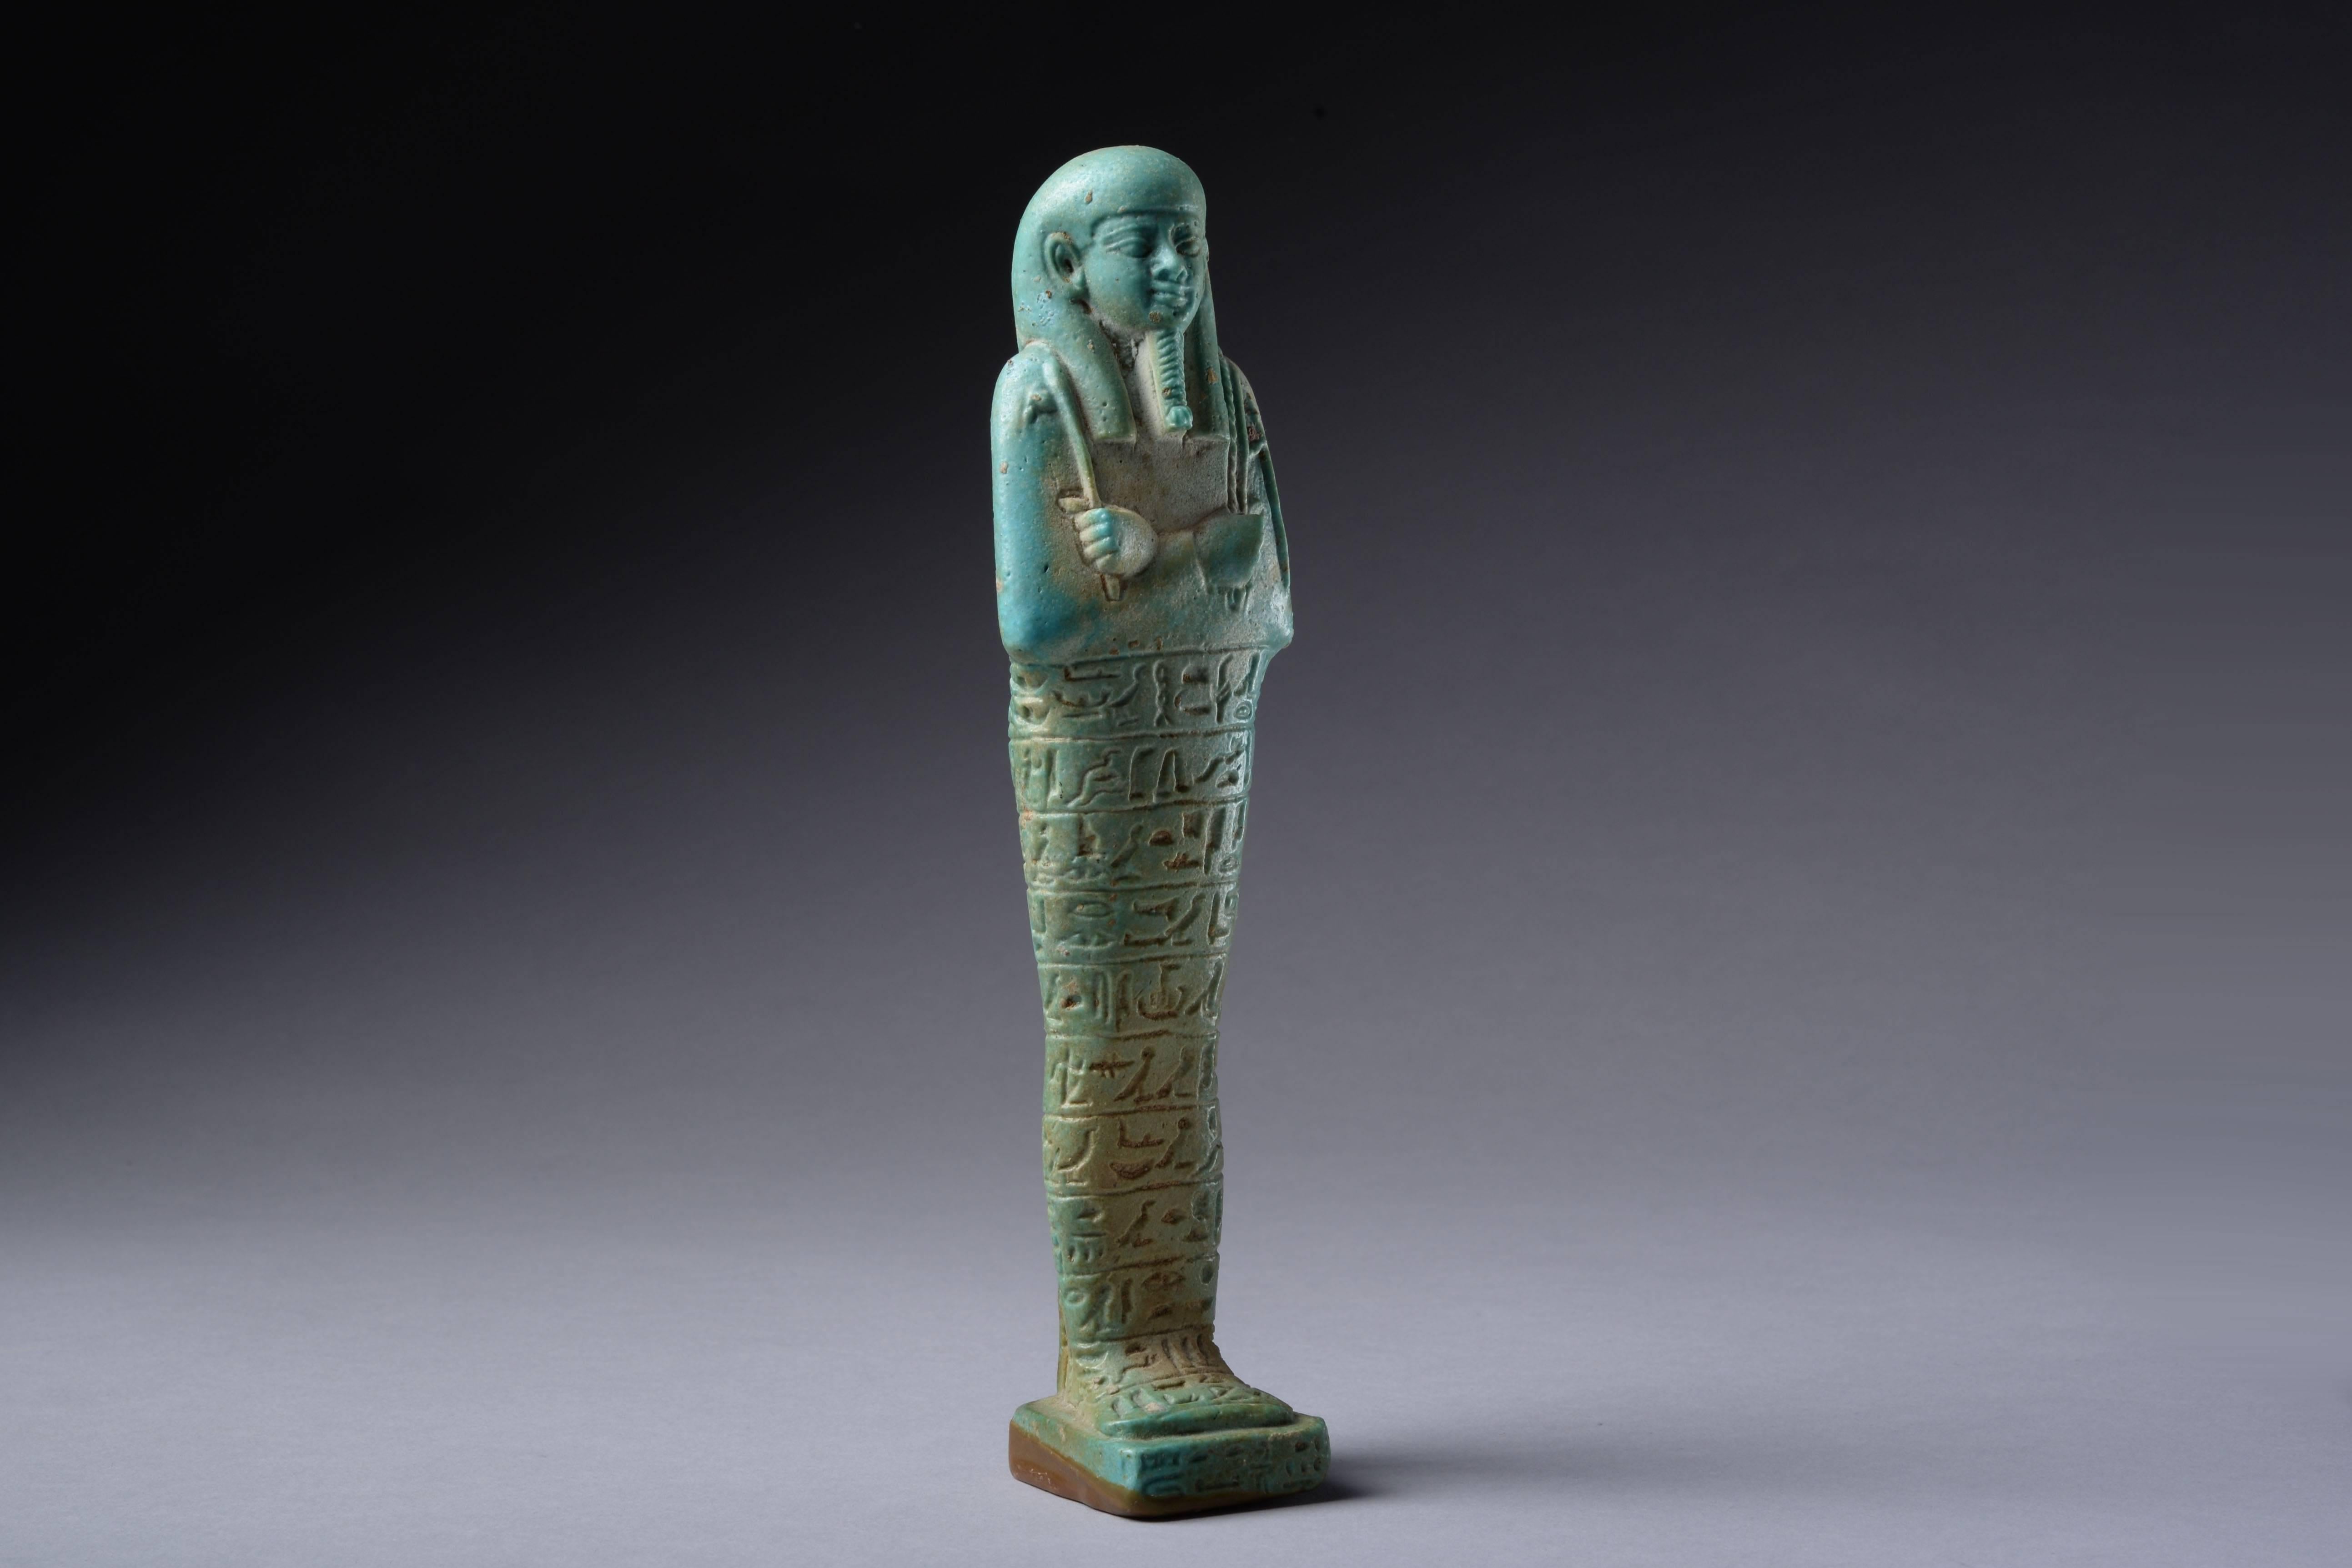 A beautiful, perfectly preserved and well provenanced ancient Egyptian blue-green faience shabti for Tjanehebu, overseer of the Royal Ships, dating to the 26th dynasty, the reign of Amasis II, 570 BC.

Of typical mummified form, with tripartite